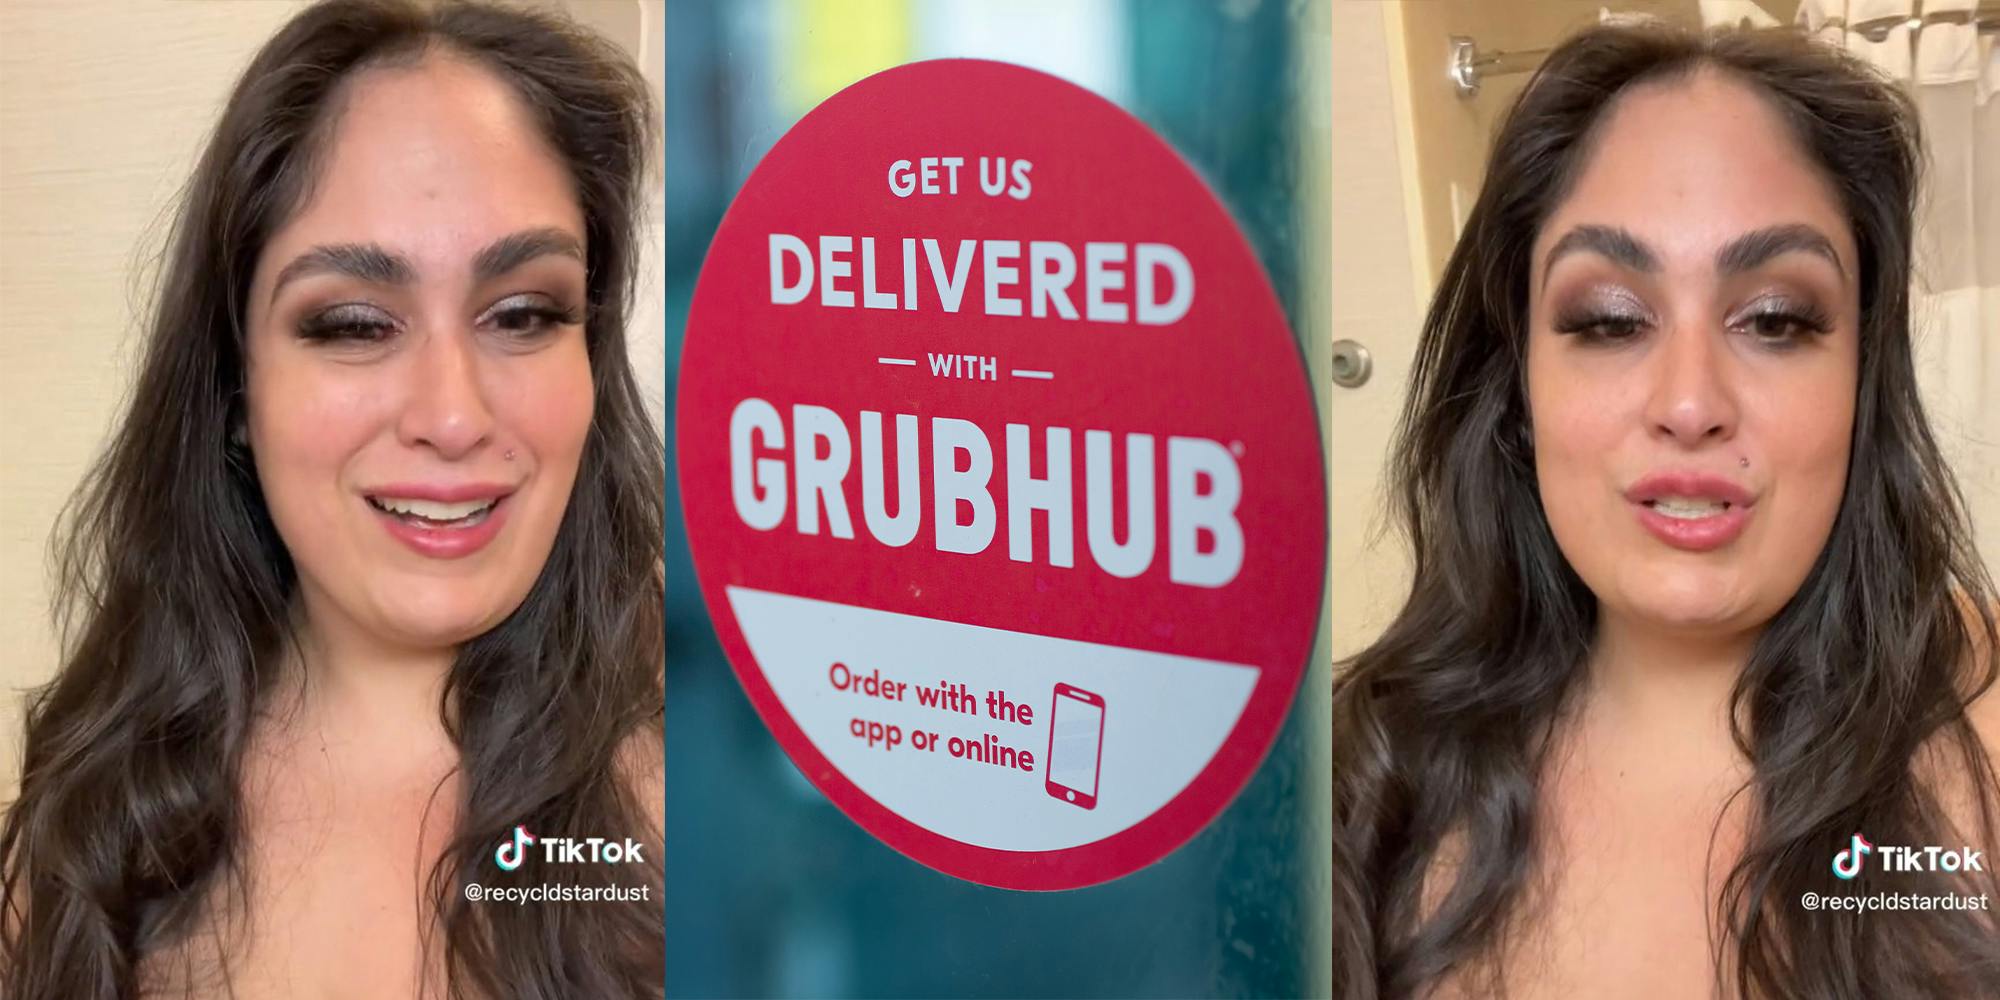 Woman Says Hotel Staff Tried To Steal Her Grubhub Order